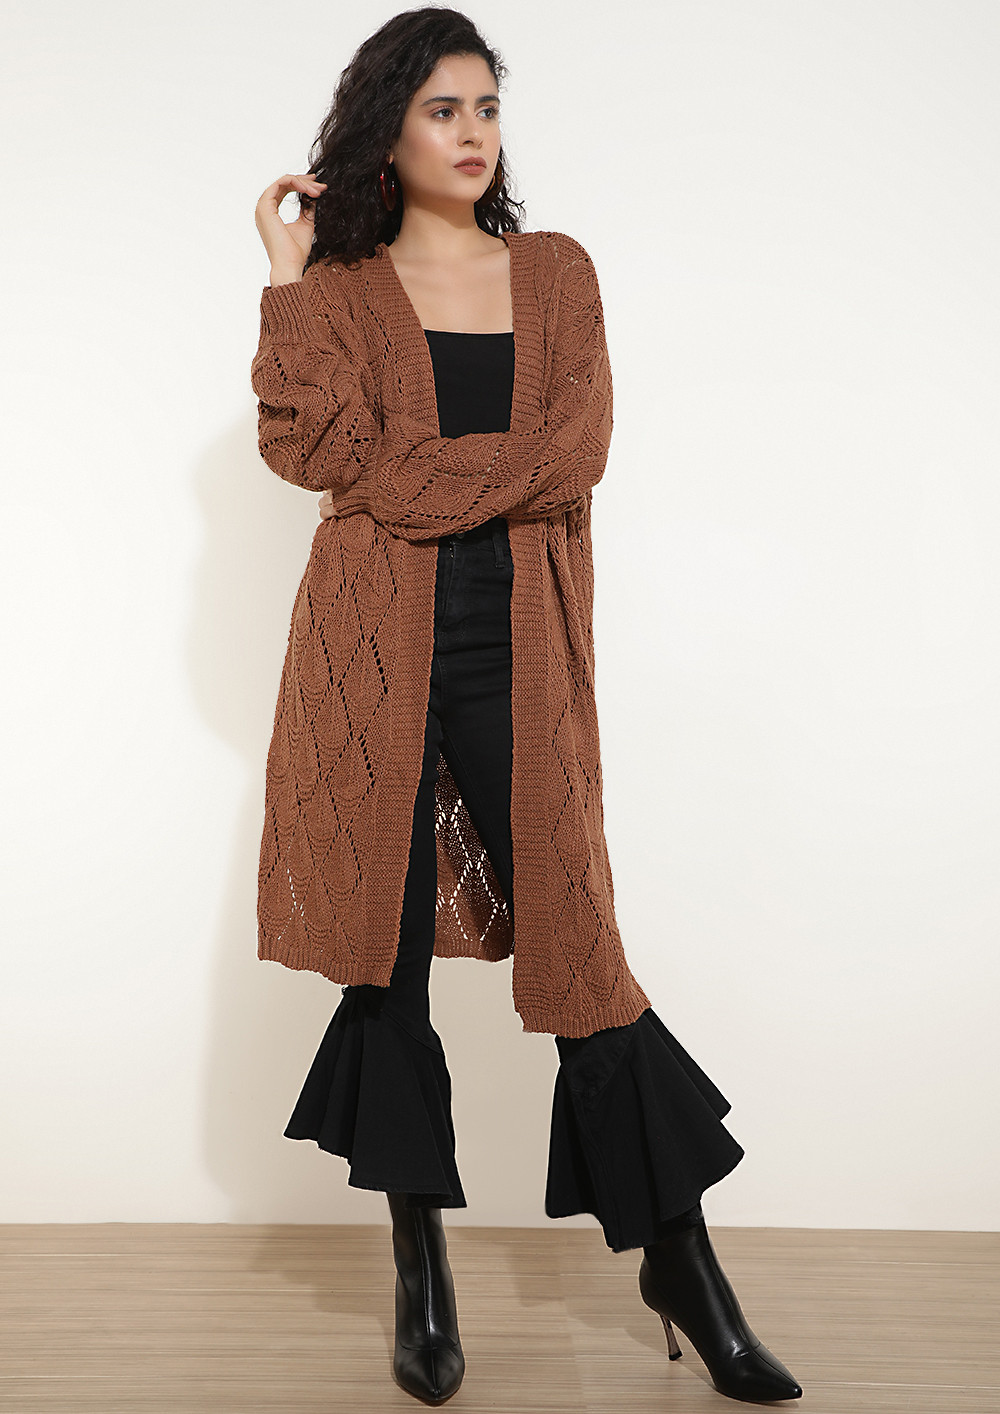 UP THE LADDER BROWN CARDIGAN